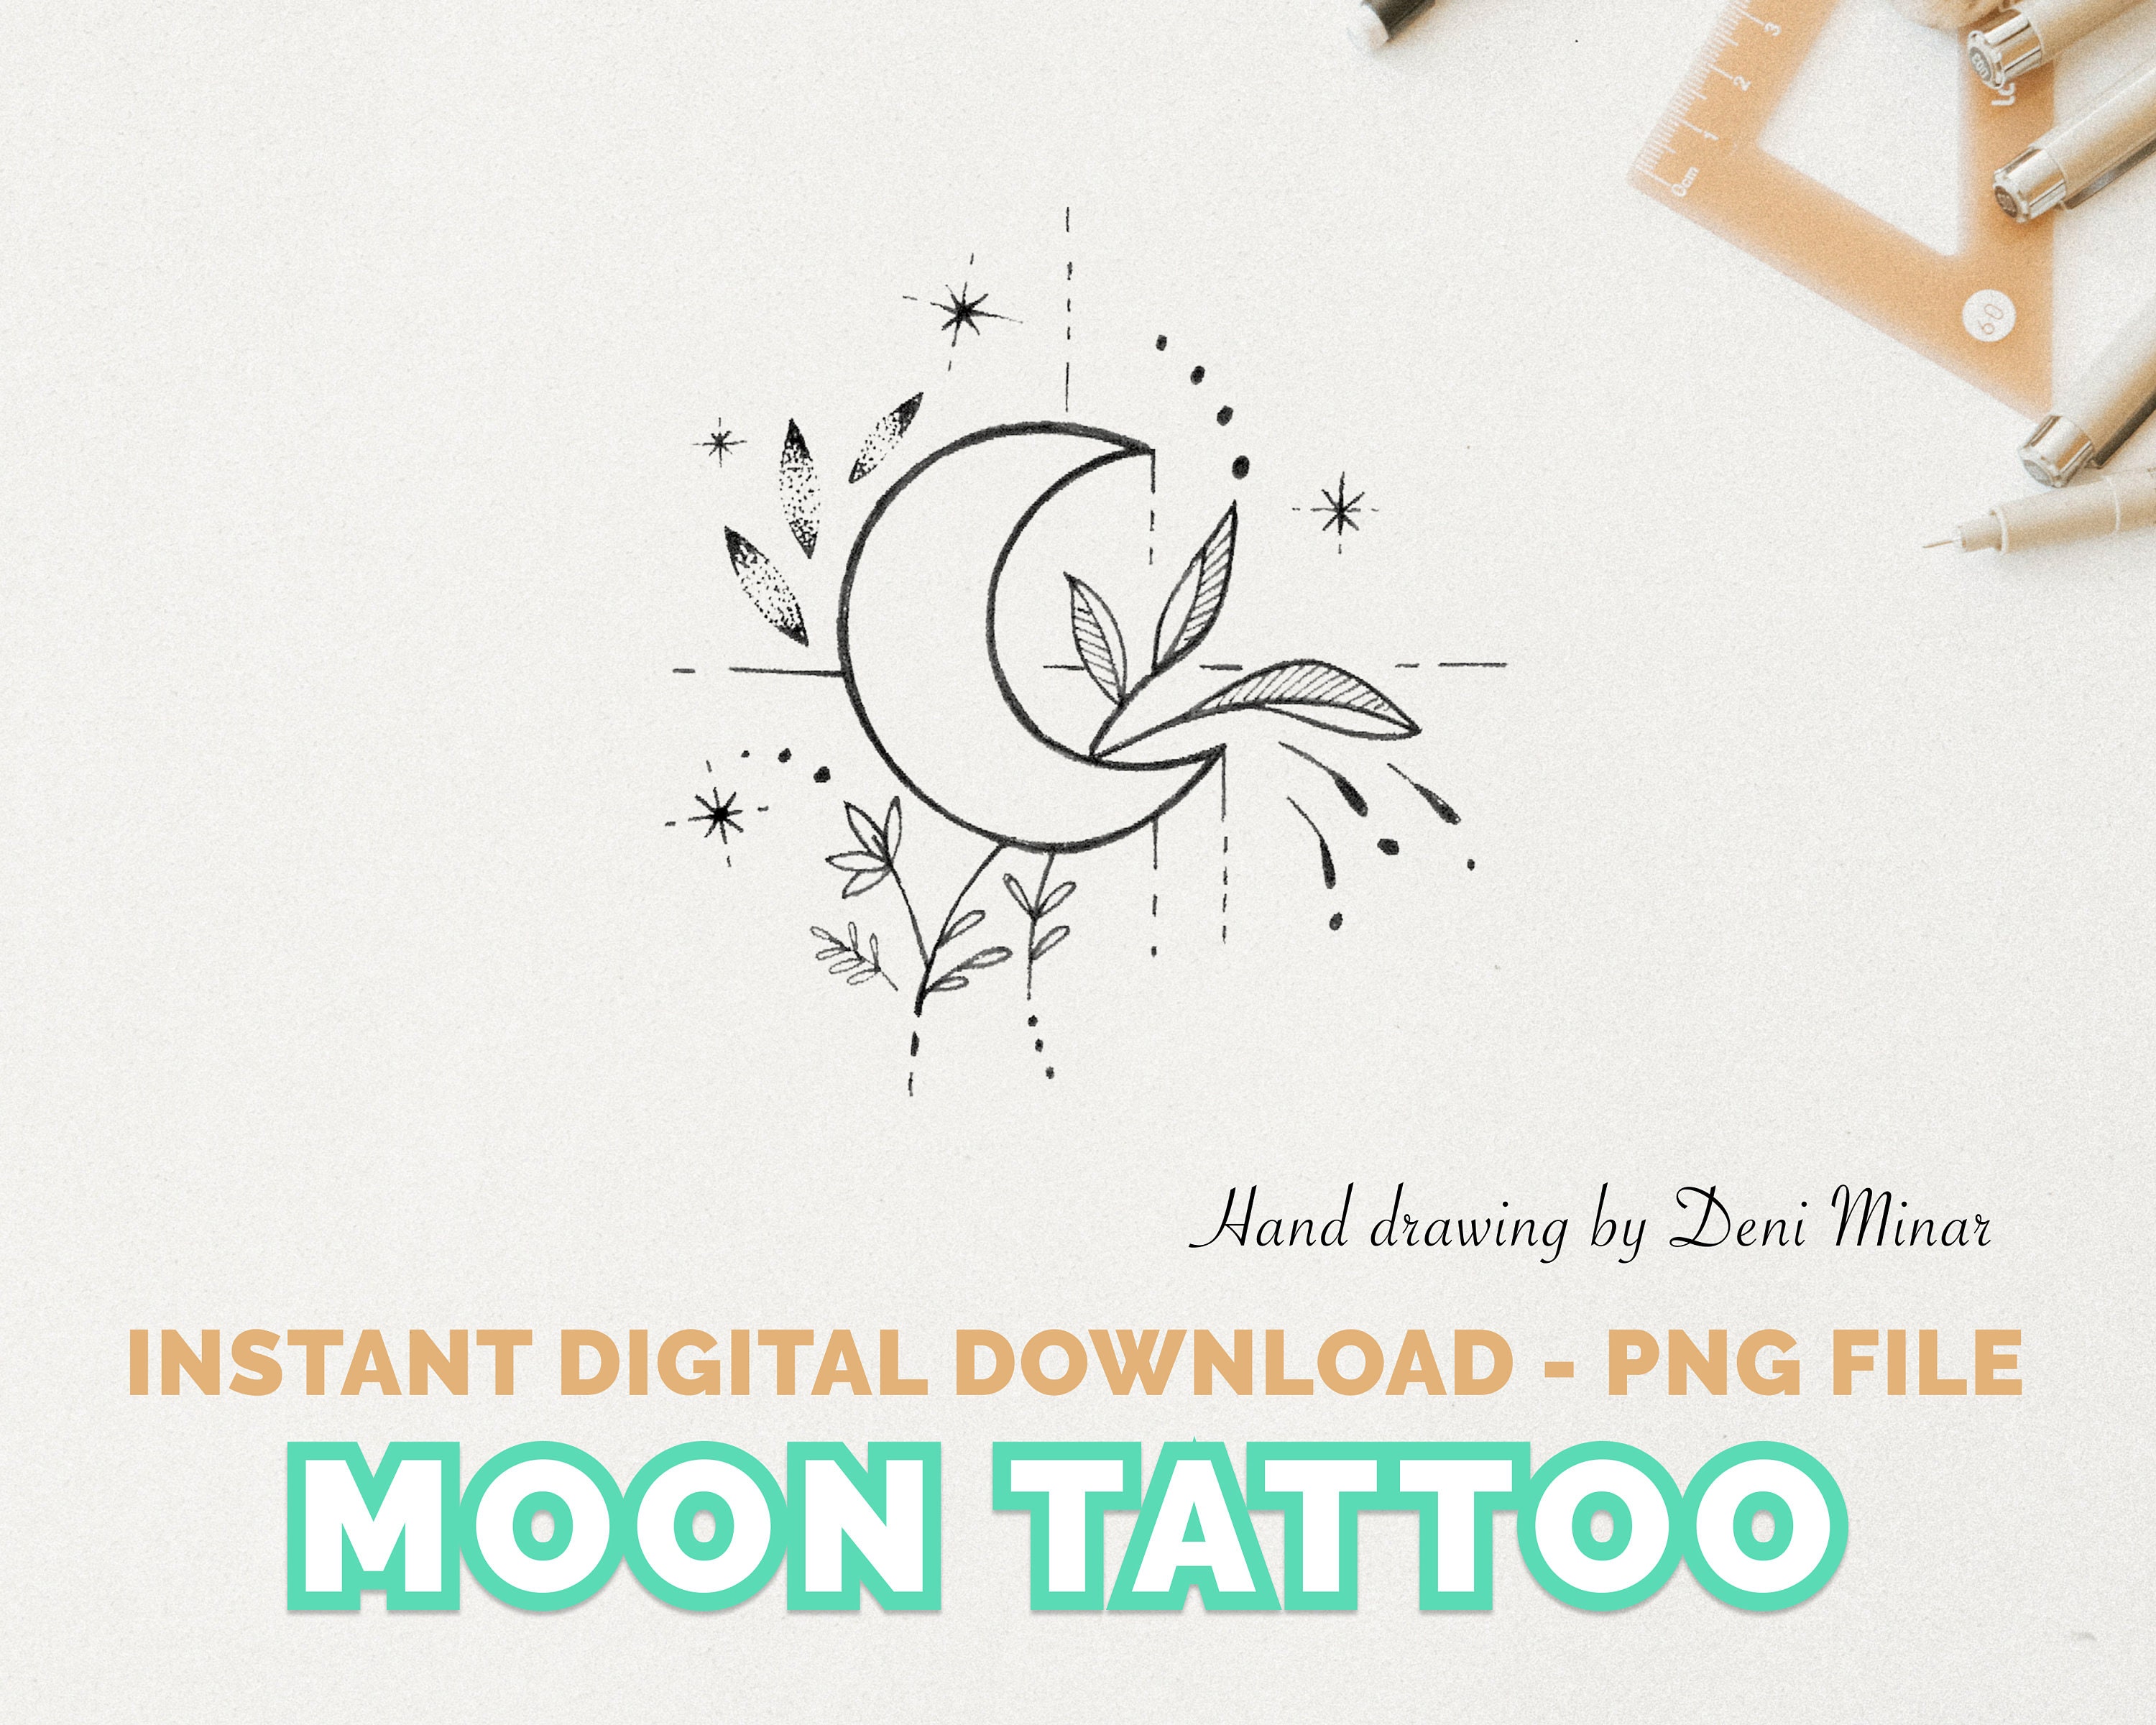 65 Moon Tattoo Design Ideas For Women To Enhance Your Beauty - Blurmark | Moon  tattoo designs, Tattoo designs, Tattoos for daughters